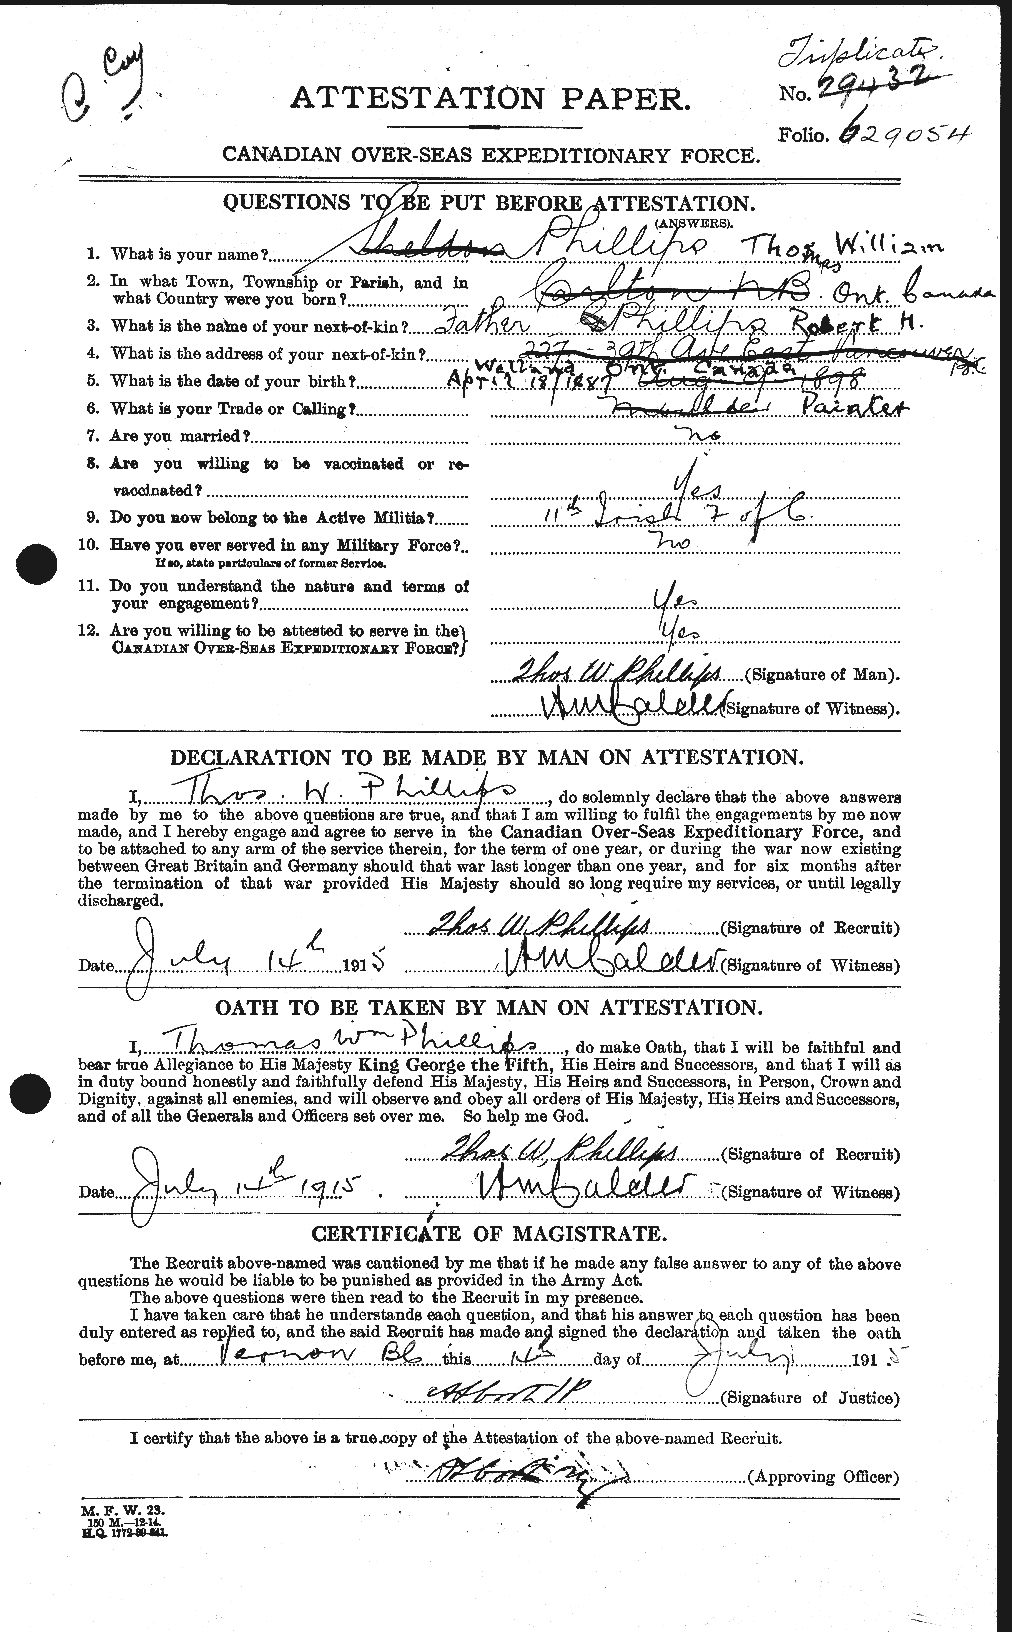 Personnel Records of the First World War - CEF 577913a